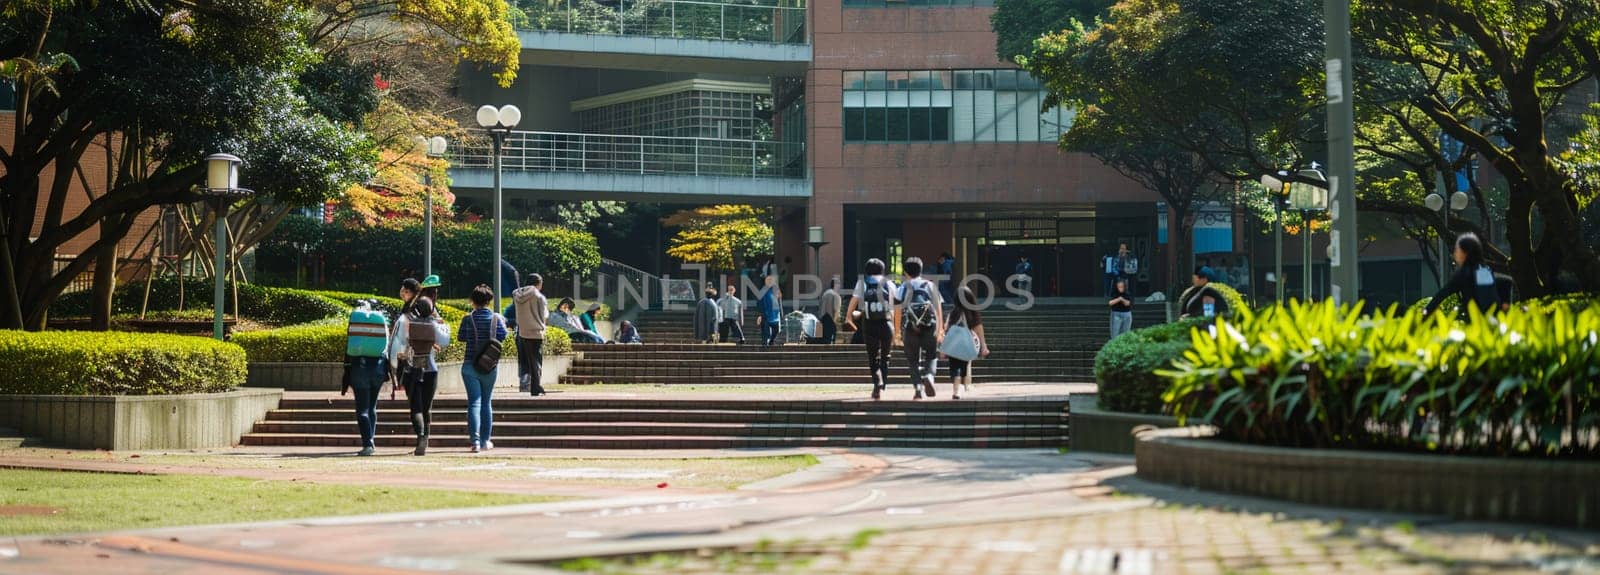 Busy college students walking through campus outdoors, surrounded by lush greenery on sunny day.